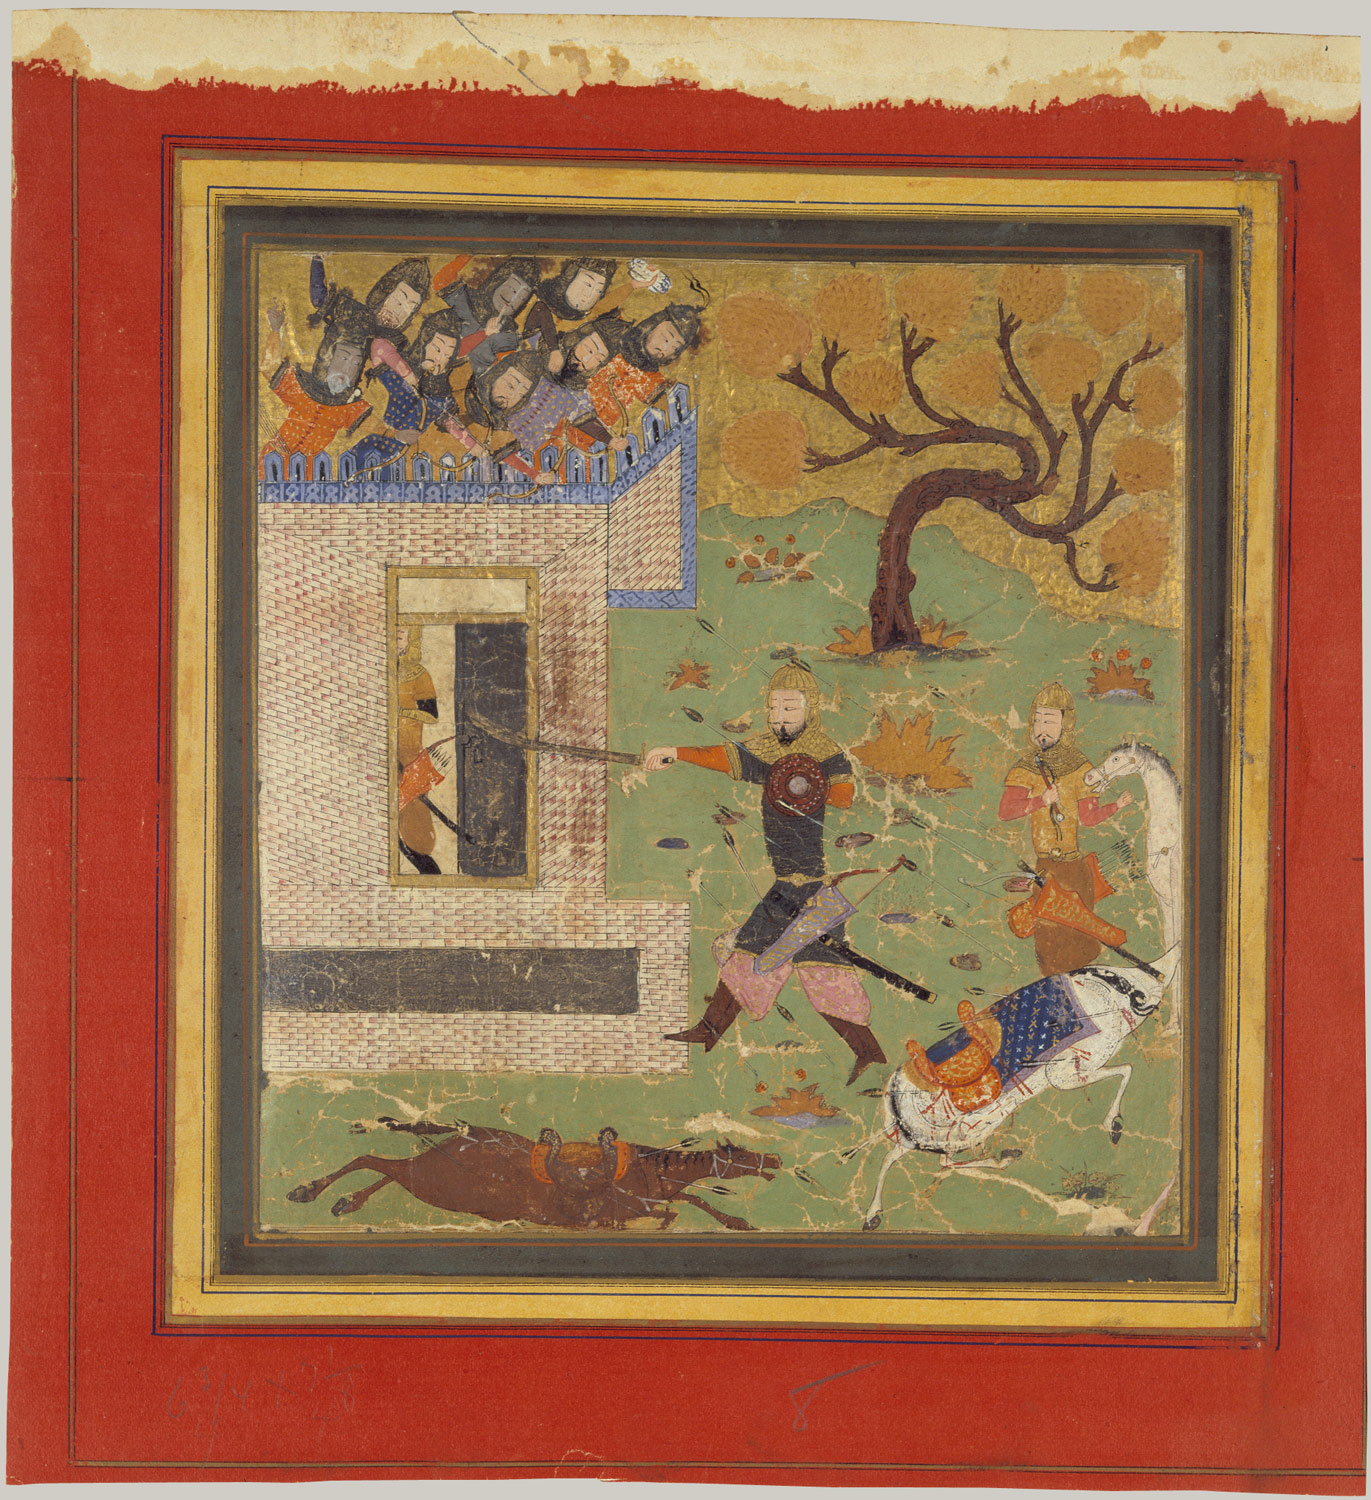 Bizhan Forces Farud to Retreat into his Fort, Folio from a Shahnama (Book of Kings)